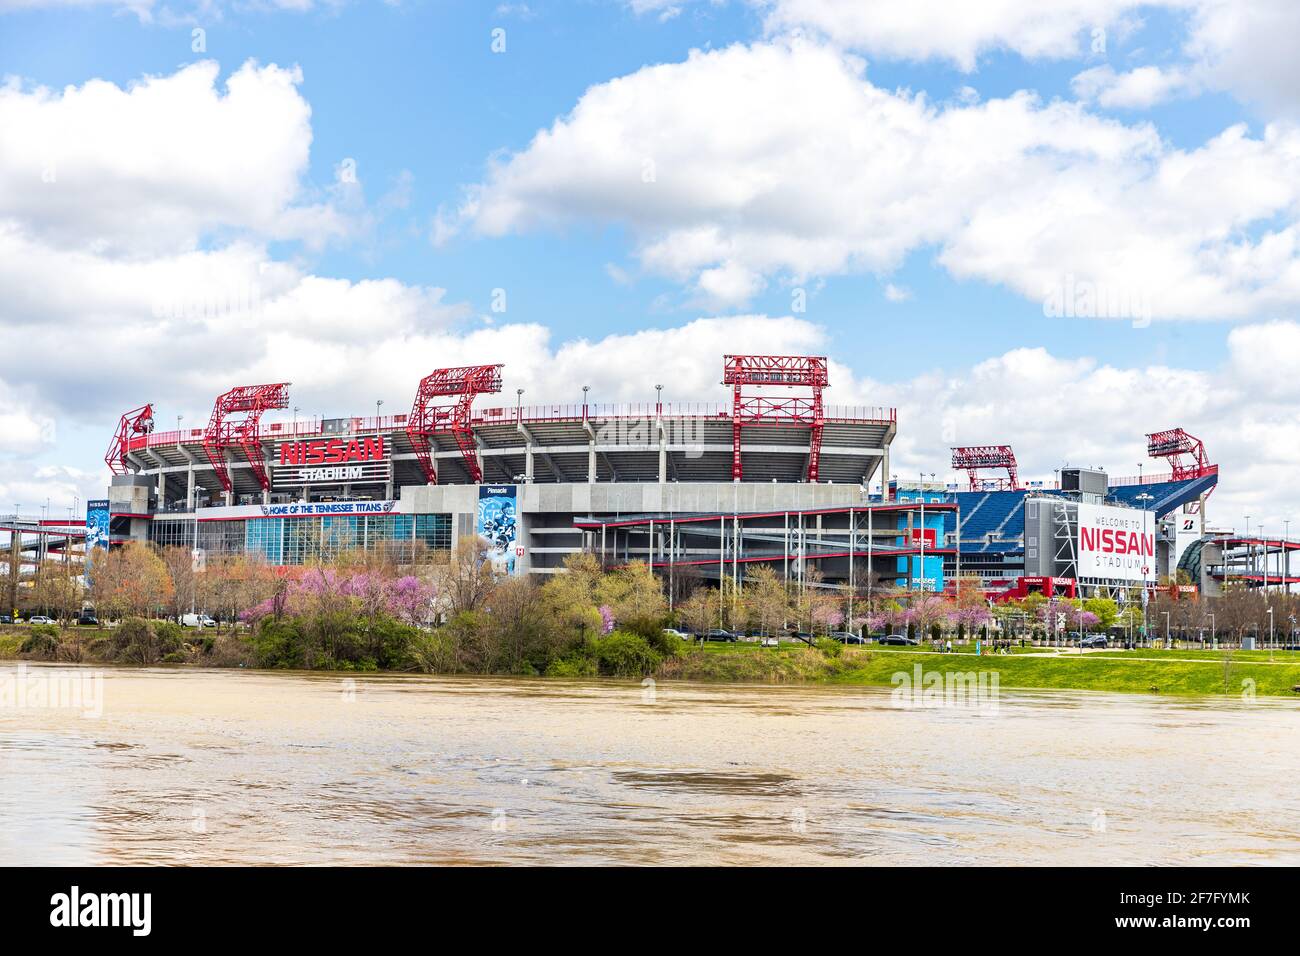 Nissan Stadium is mainly home to the NFL's Tennessee Titans but also hosts other football and soccer games, concerts, and events. Stock Photo